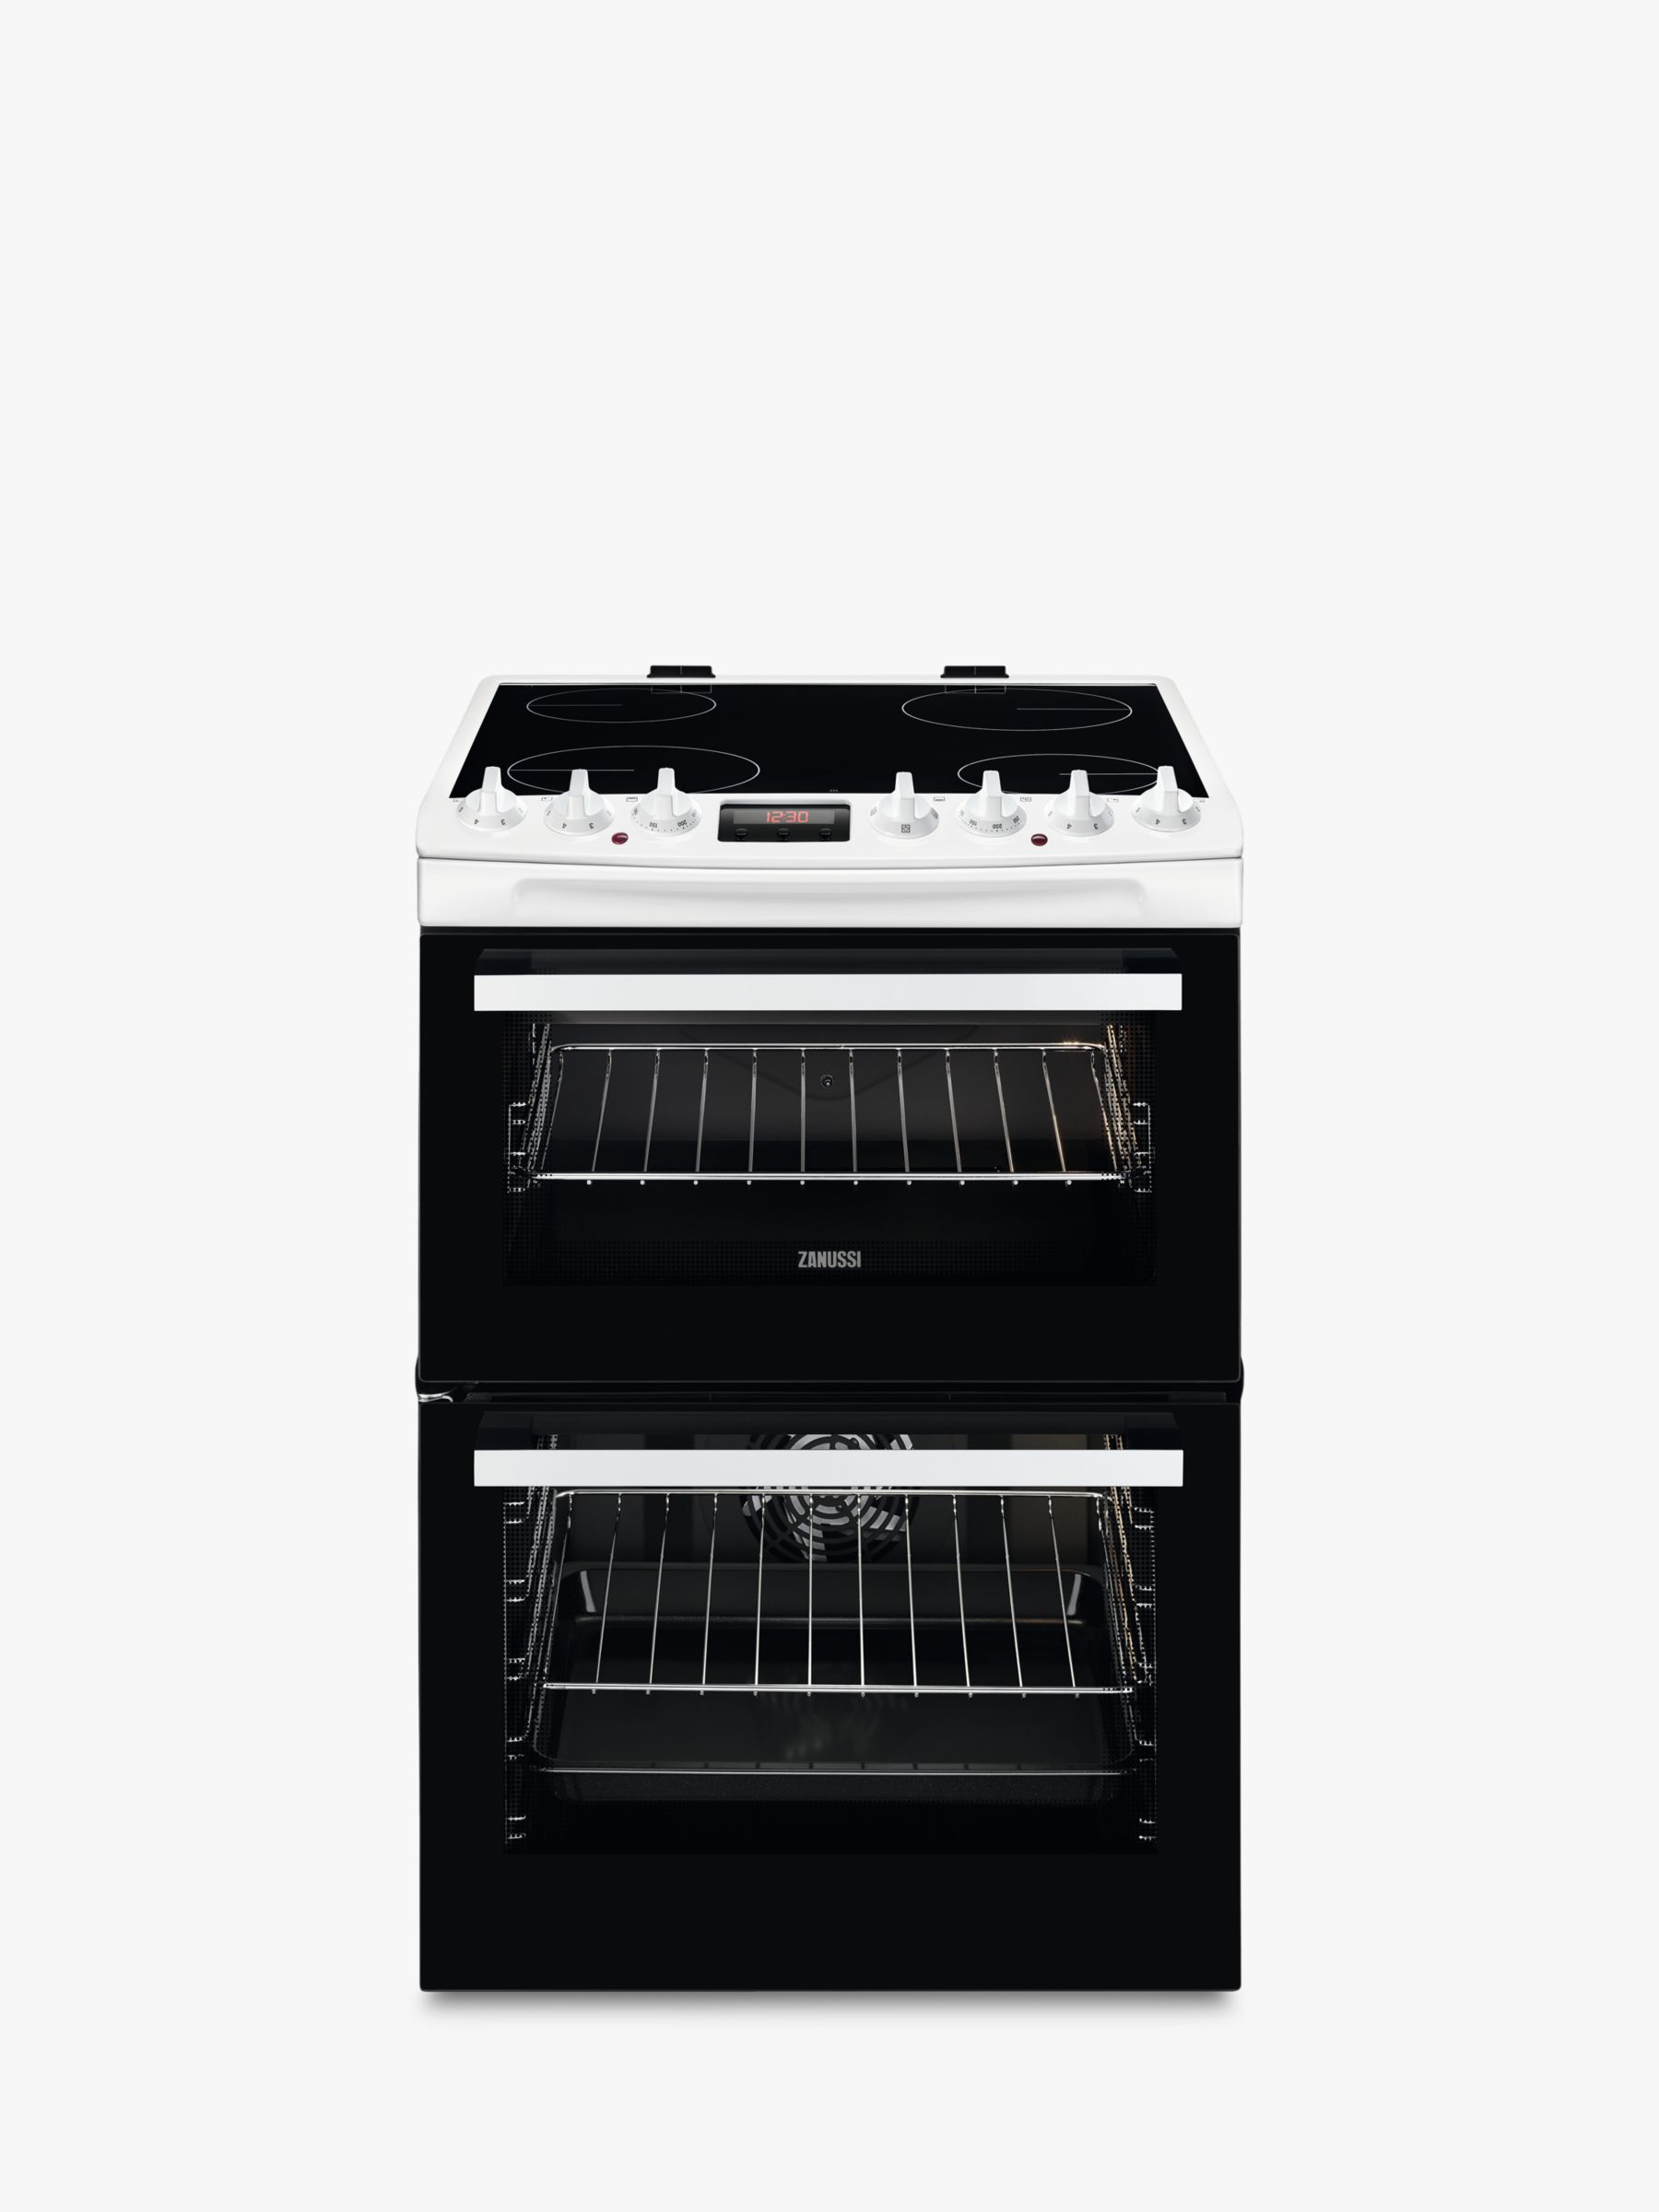 Zanussi ZCV69350 Freestanding Electric Cooker, A/A Energy Rating, 60cm Wide